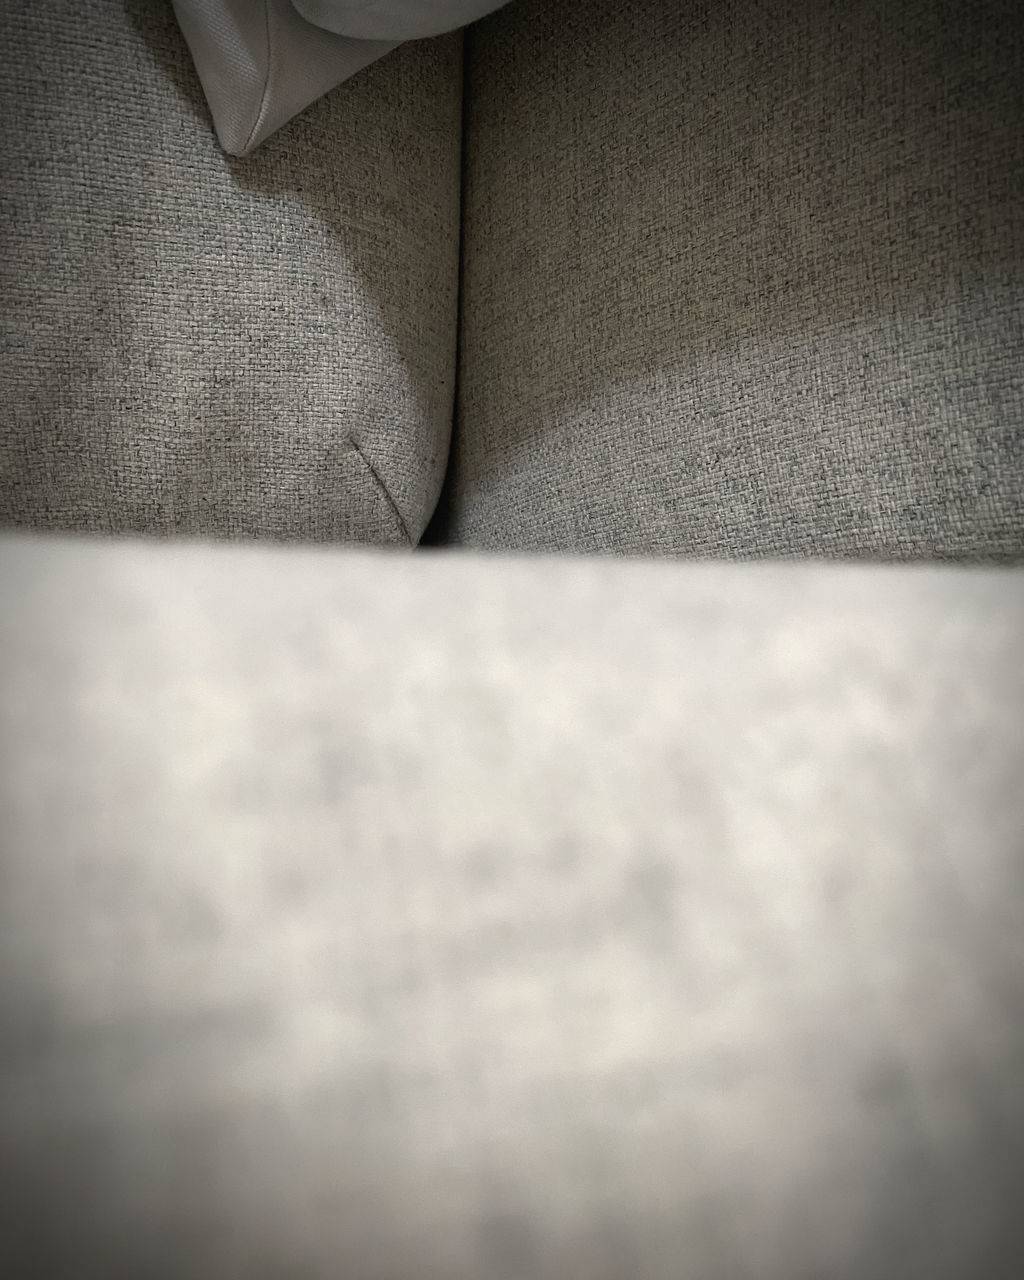 white, black, indoors, close-up, black and white, monochrome, no people, textile, sofa, vignette, light, furniture, selective focus, monochrome photography, textured, darkness, arm